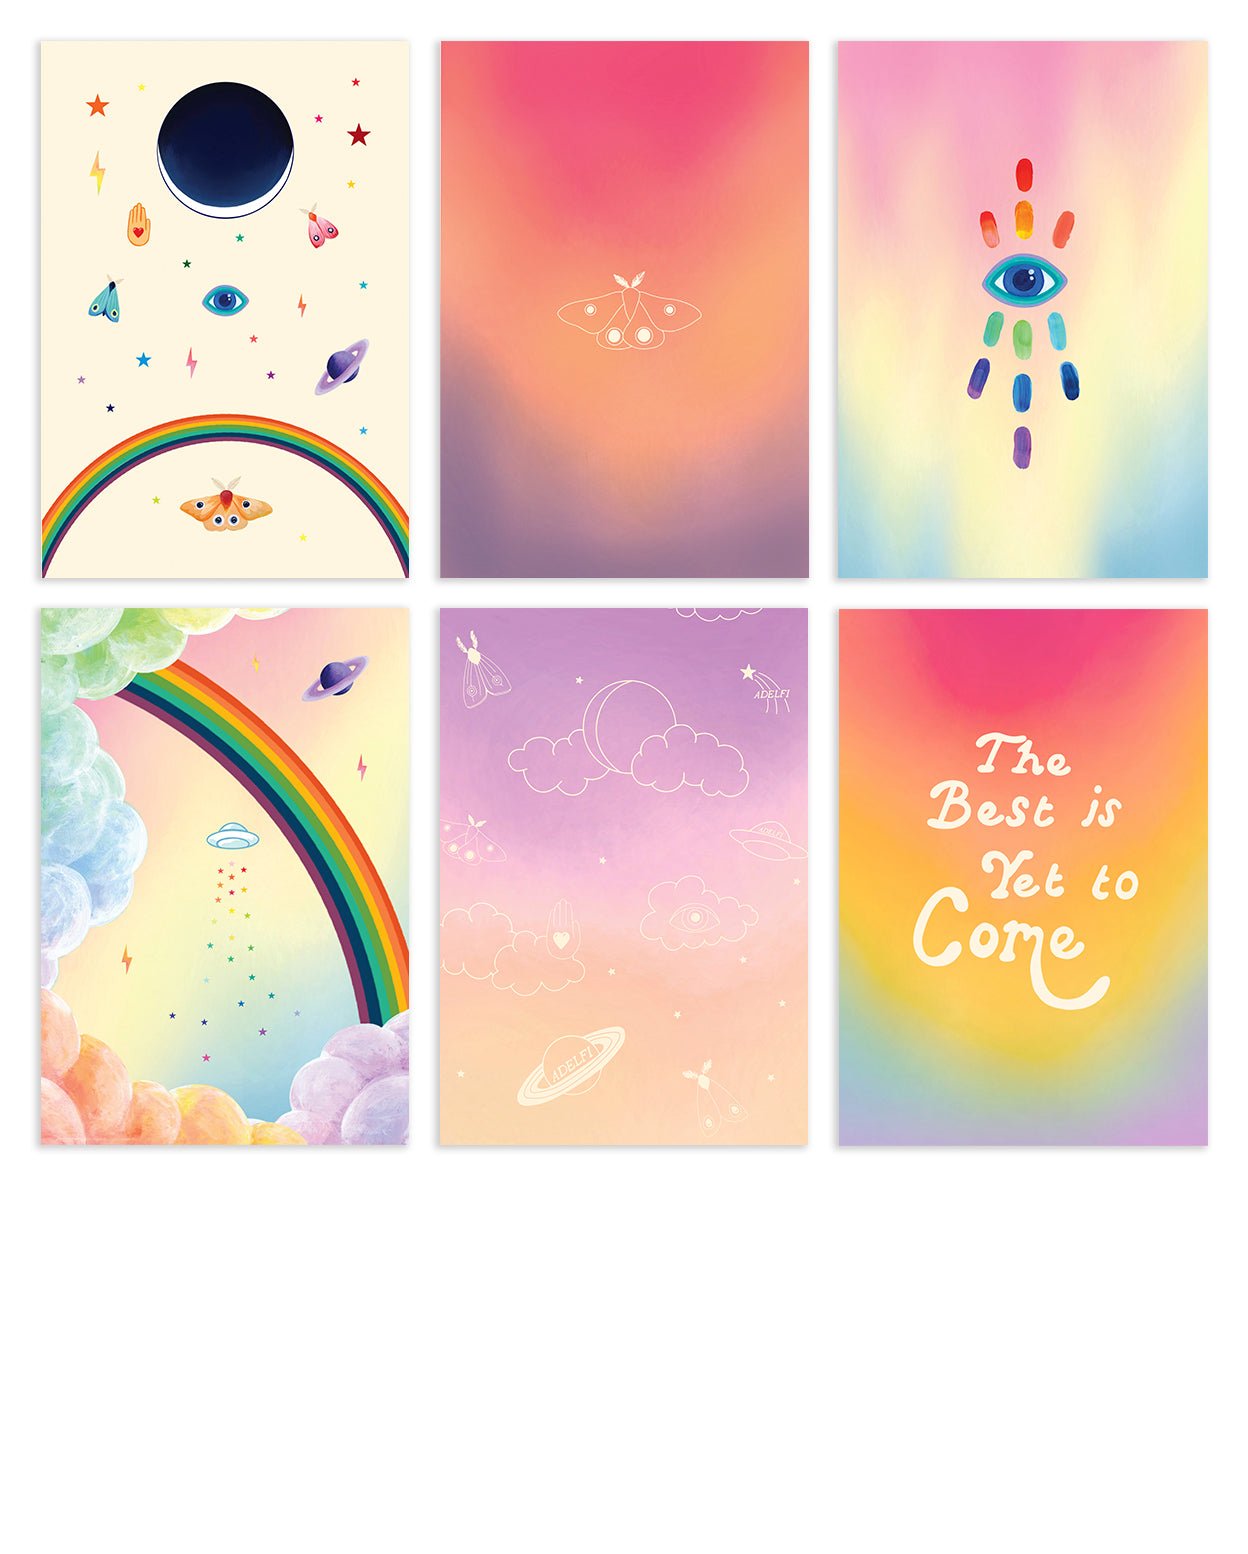 Neon icons postcard pack with variations of design. Cream colored card with an eclipse and varying neon icons. A pink, orange, and purple gradient sky with a hollow white moth on top. A pink, yellow, and blue gradient sky with a blue evil eye on top and rainbow-colored streaks. Rainbow clouds with a rainbow and varying neon icons on a pink, yellow and blue gradient sky. Hollow neon icons on a purple and orange ombre background. Rainbow gradient with center-aligned bold text &quot;The Best is Yet to Come.&quot;